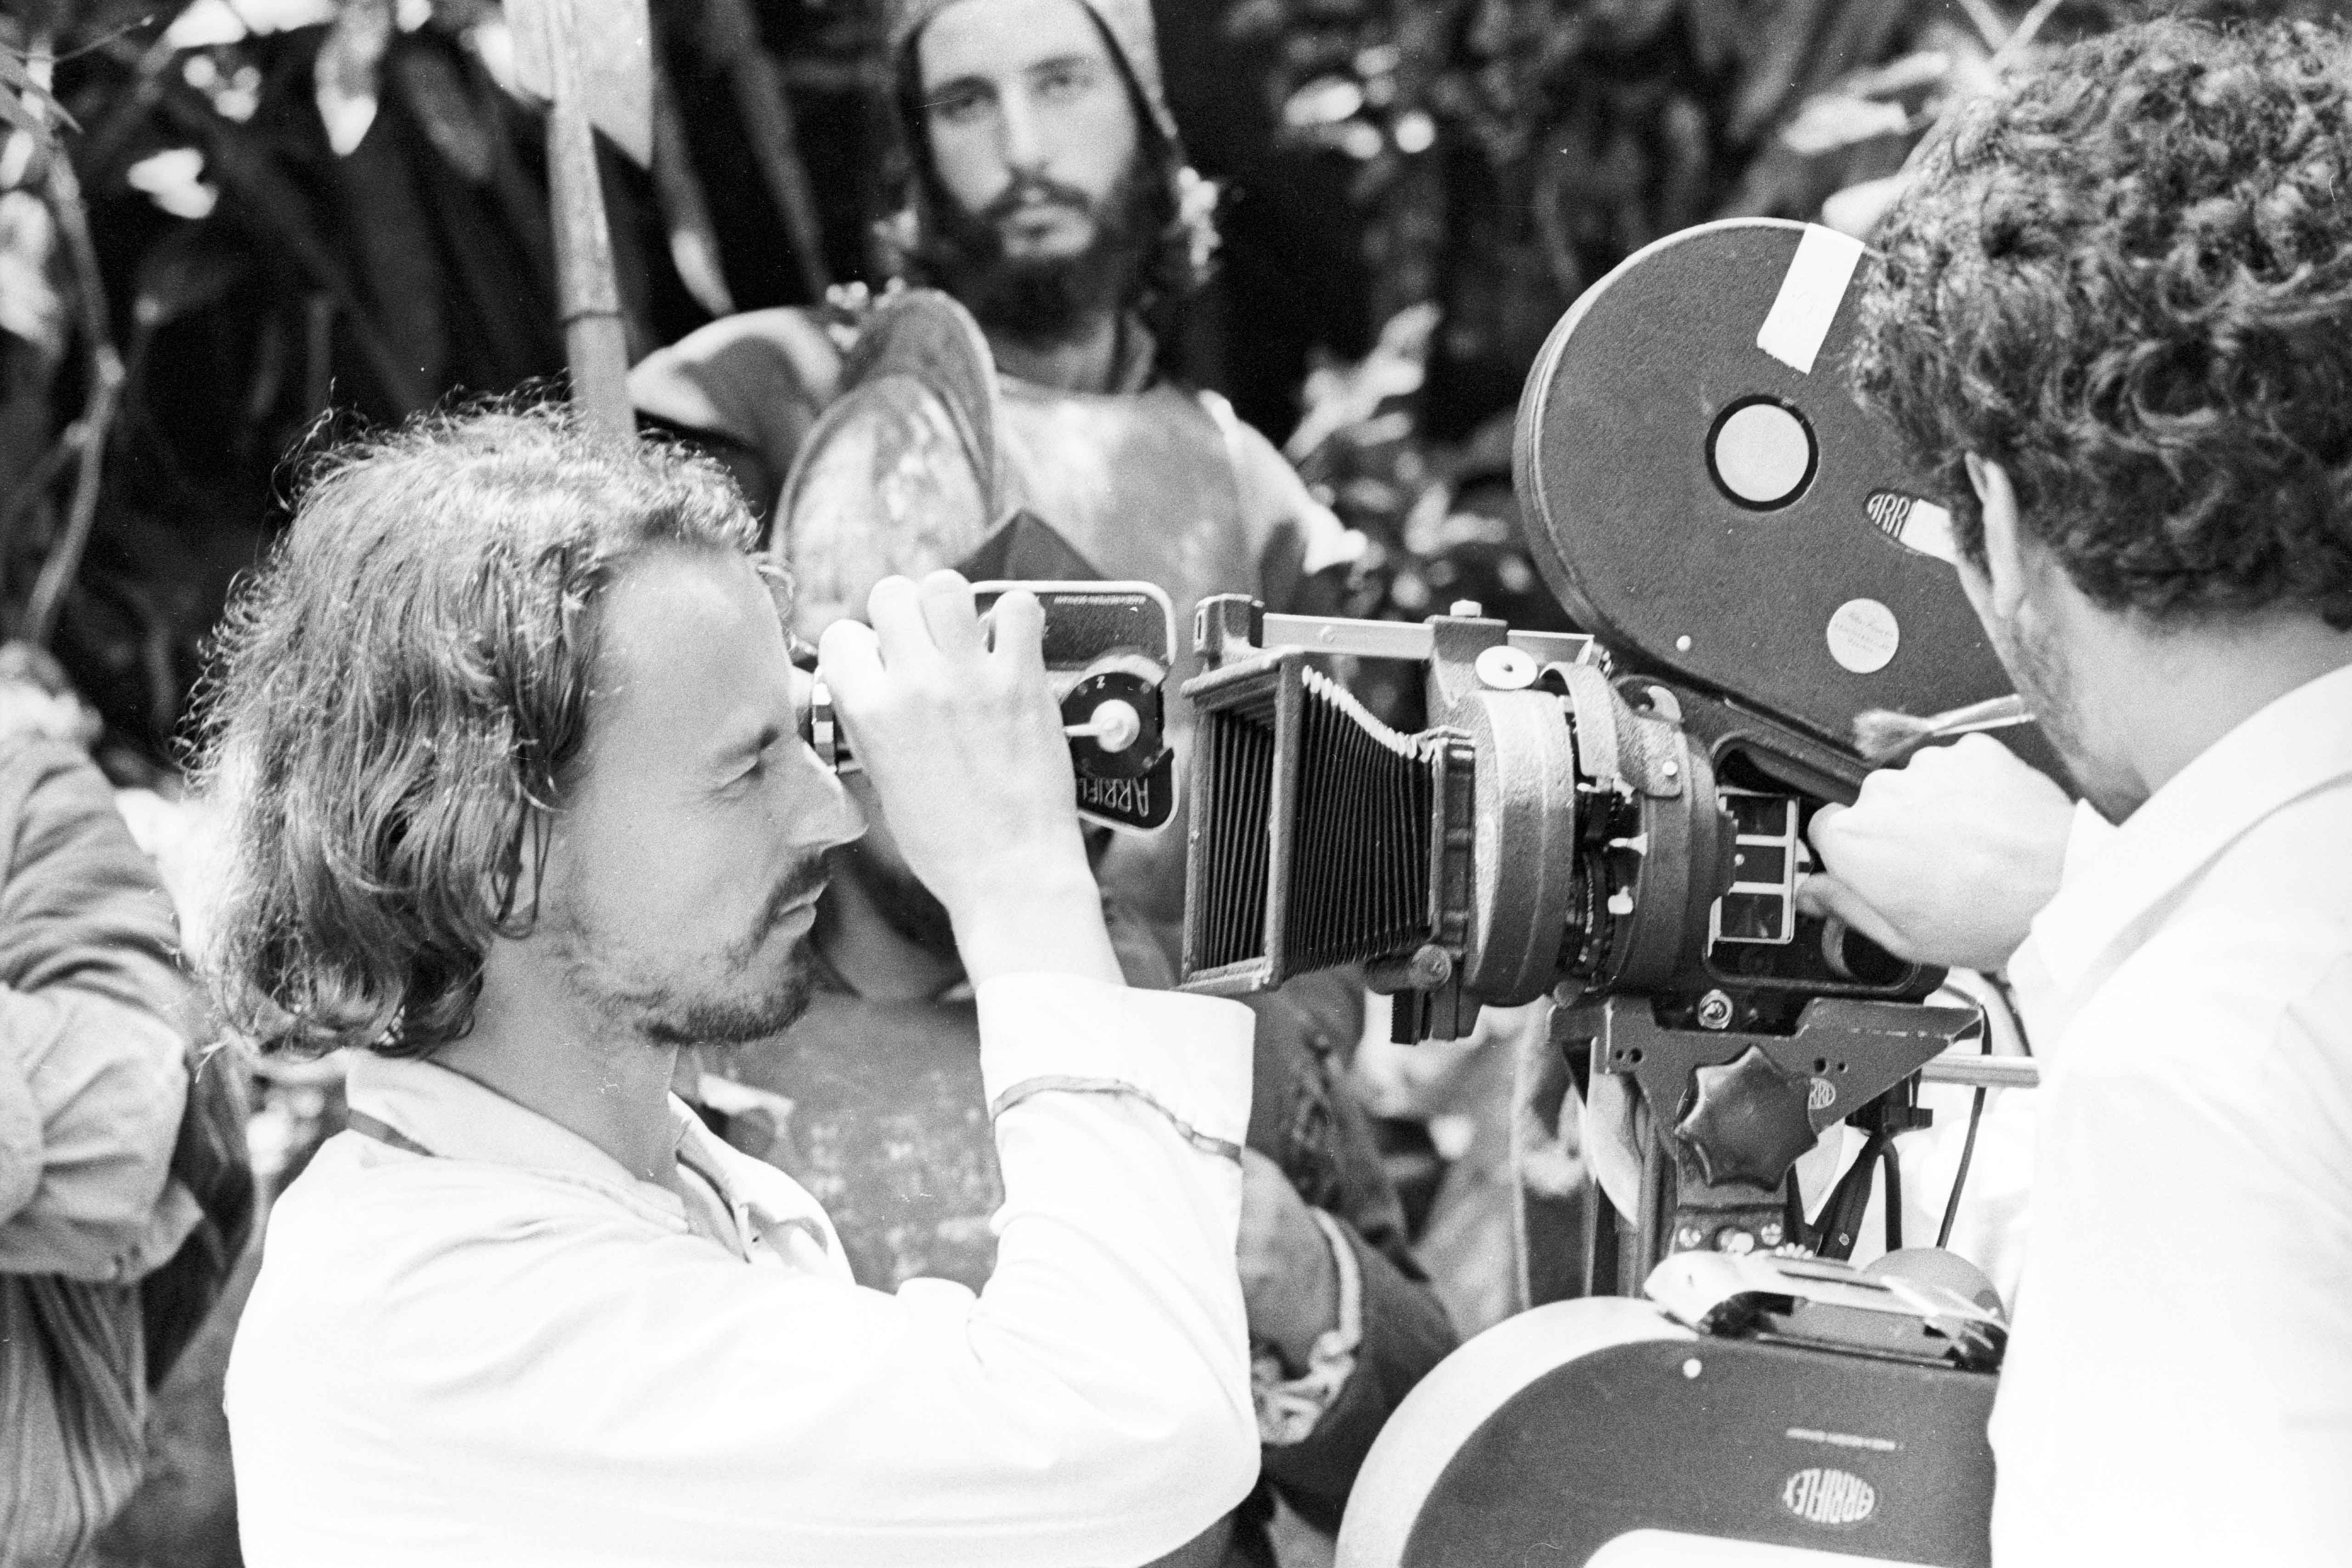 Behind the scenes of the film Aguirre, der Zorn Gottes